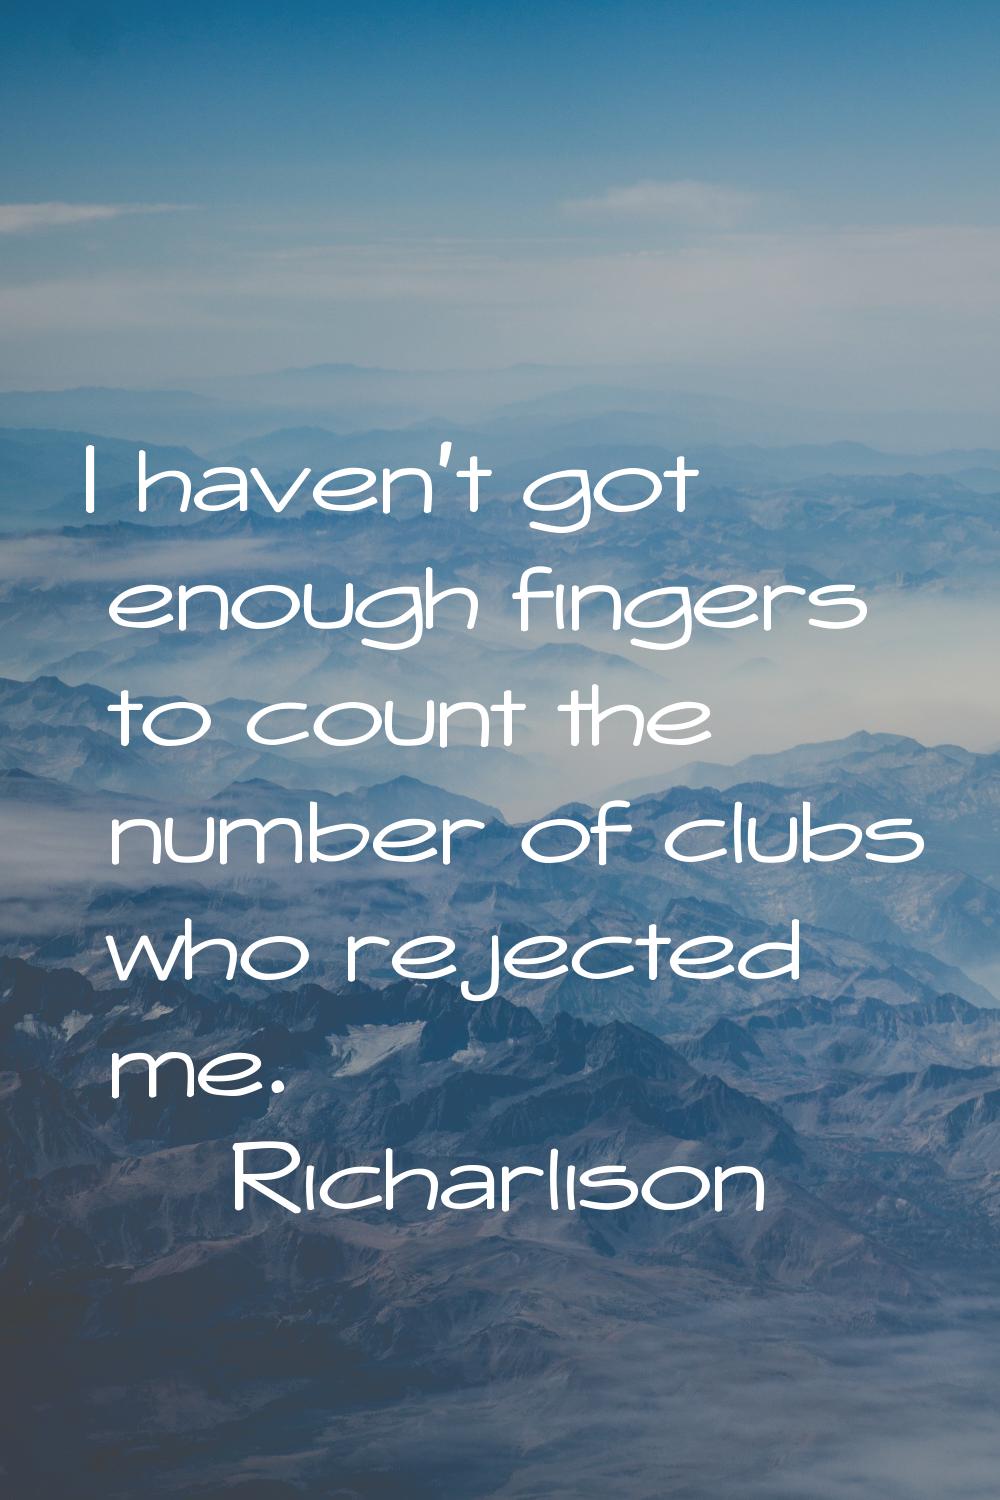 I haven't got enough fingers to count the number of clubs who rejected me.